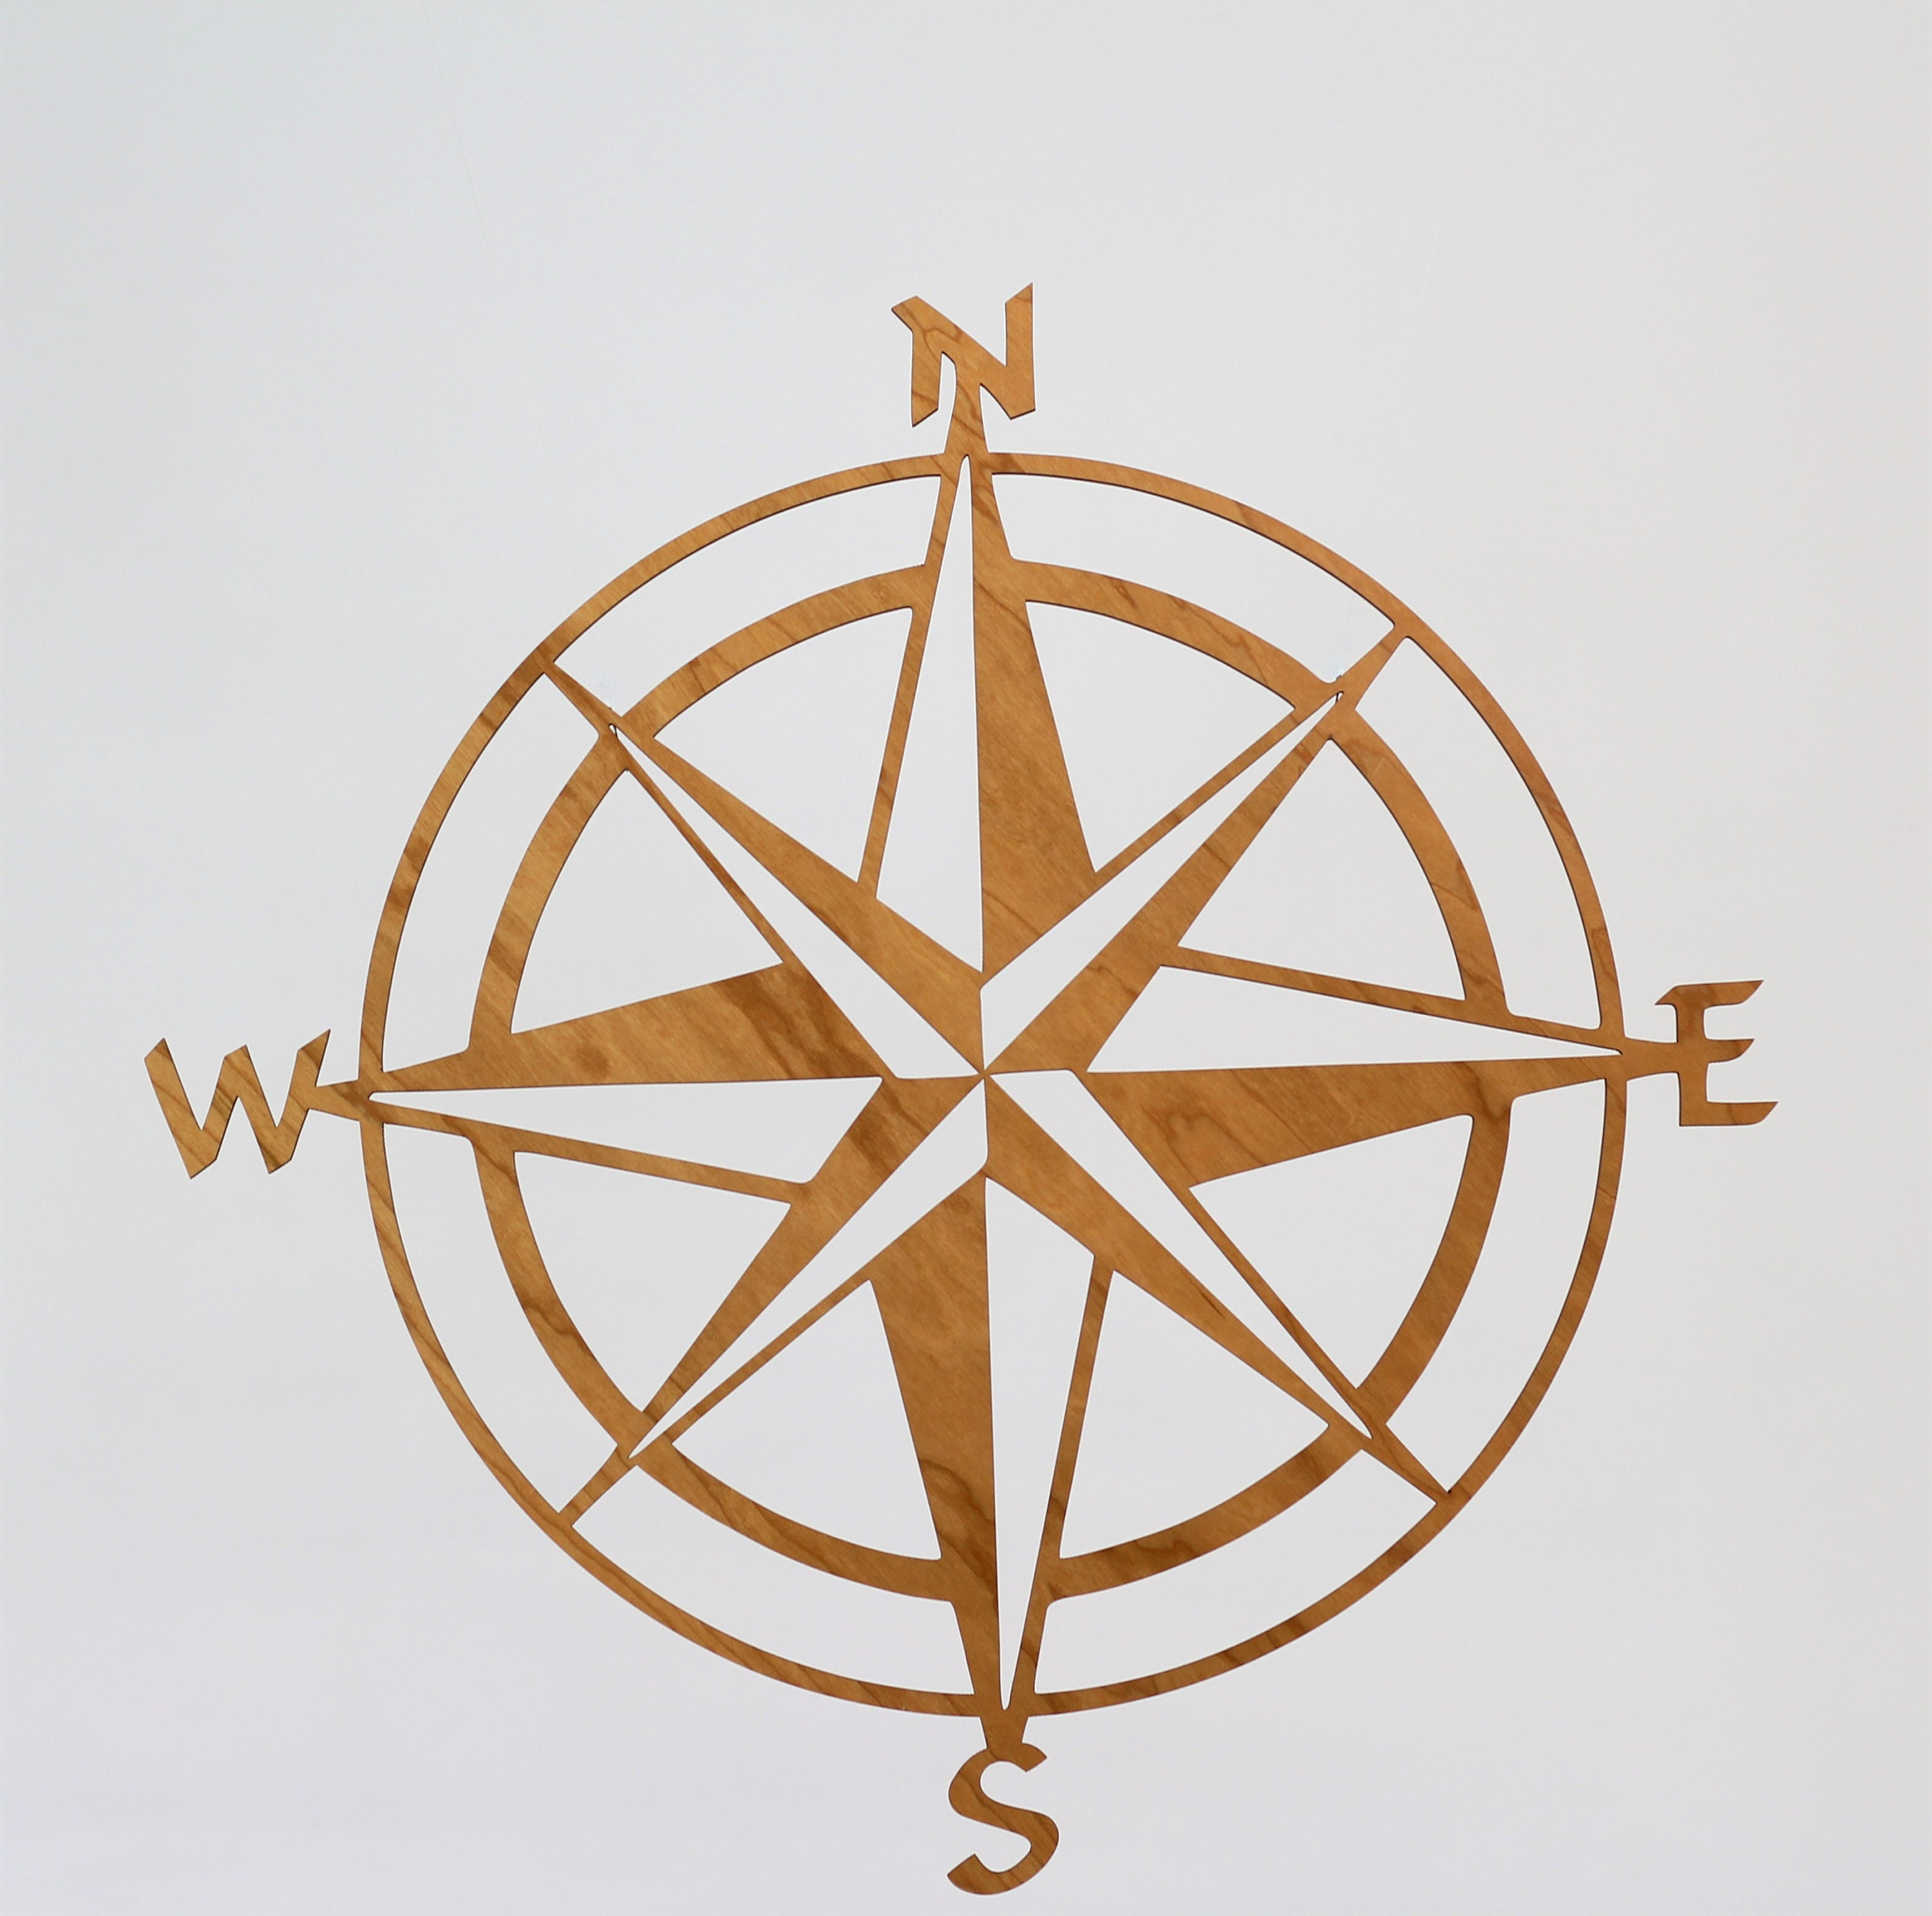 8" N S E W Letters-Directional Letters-Compass Directions-Outdoor Art-F1004 